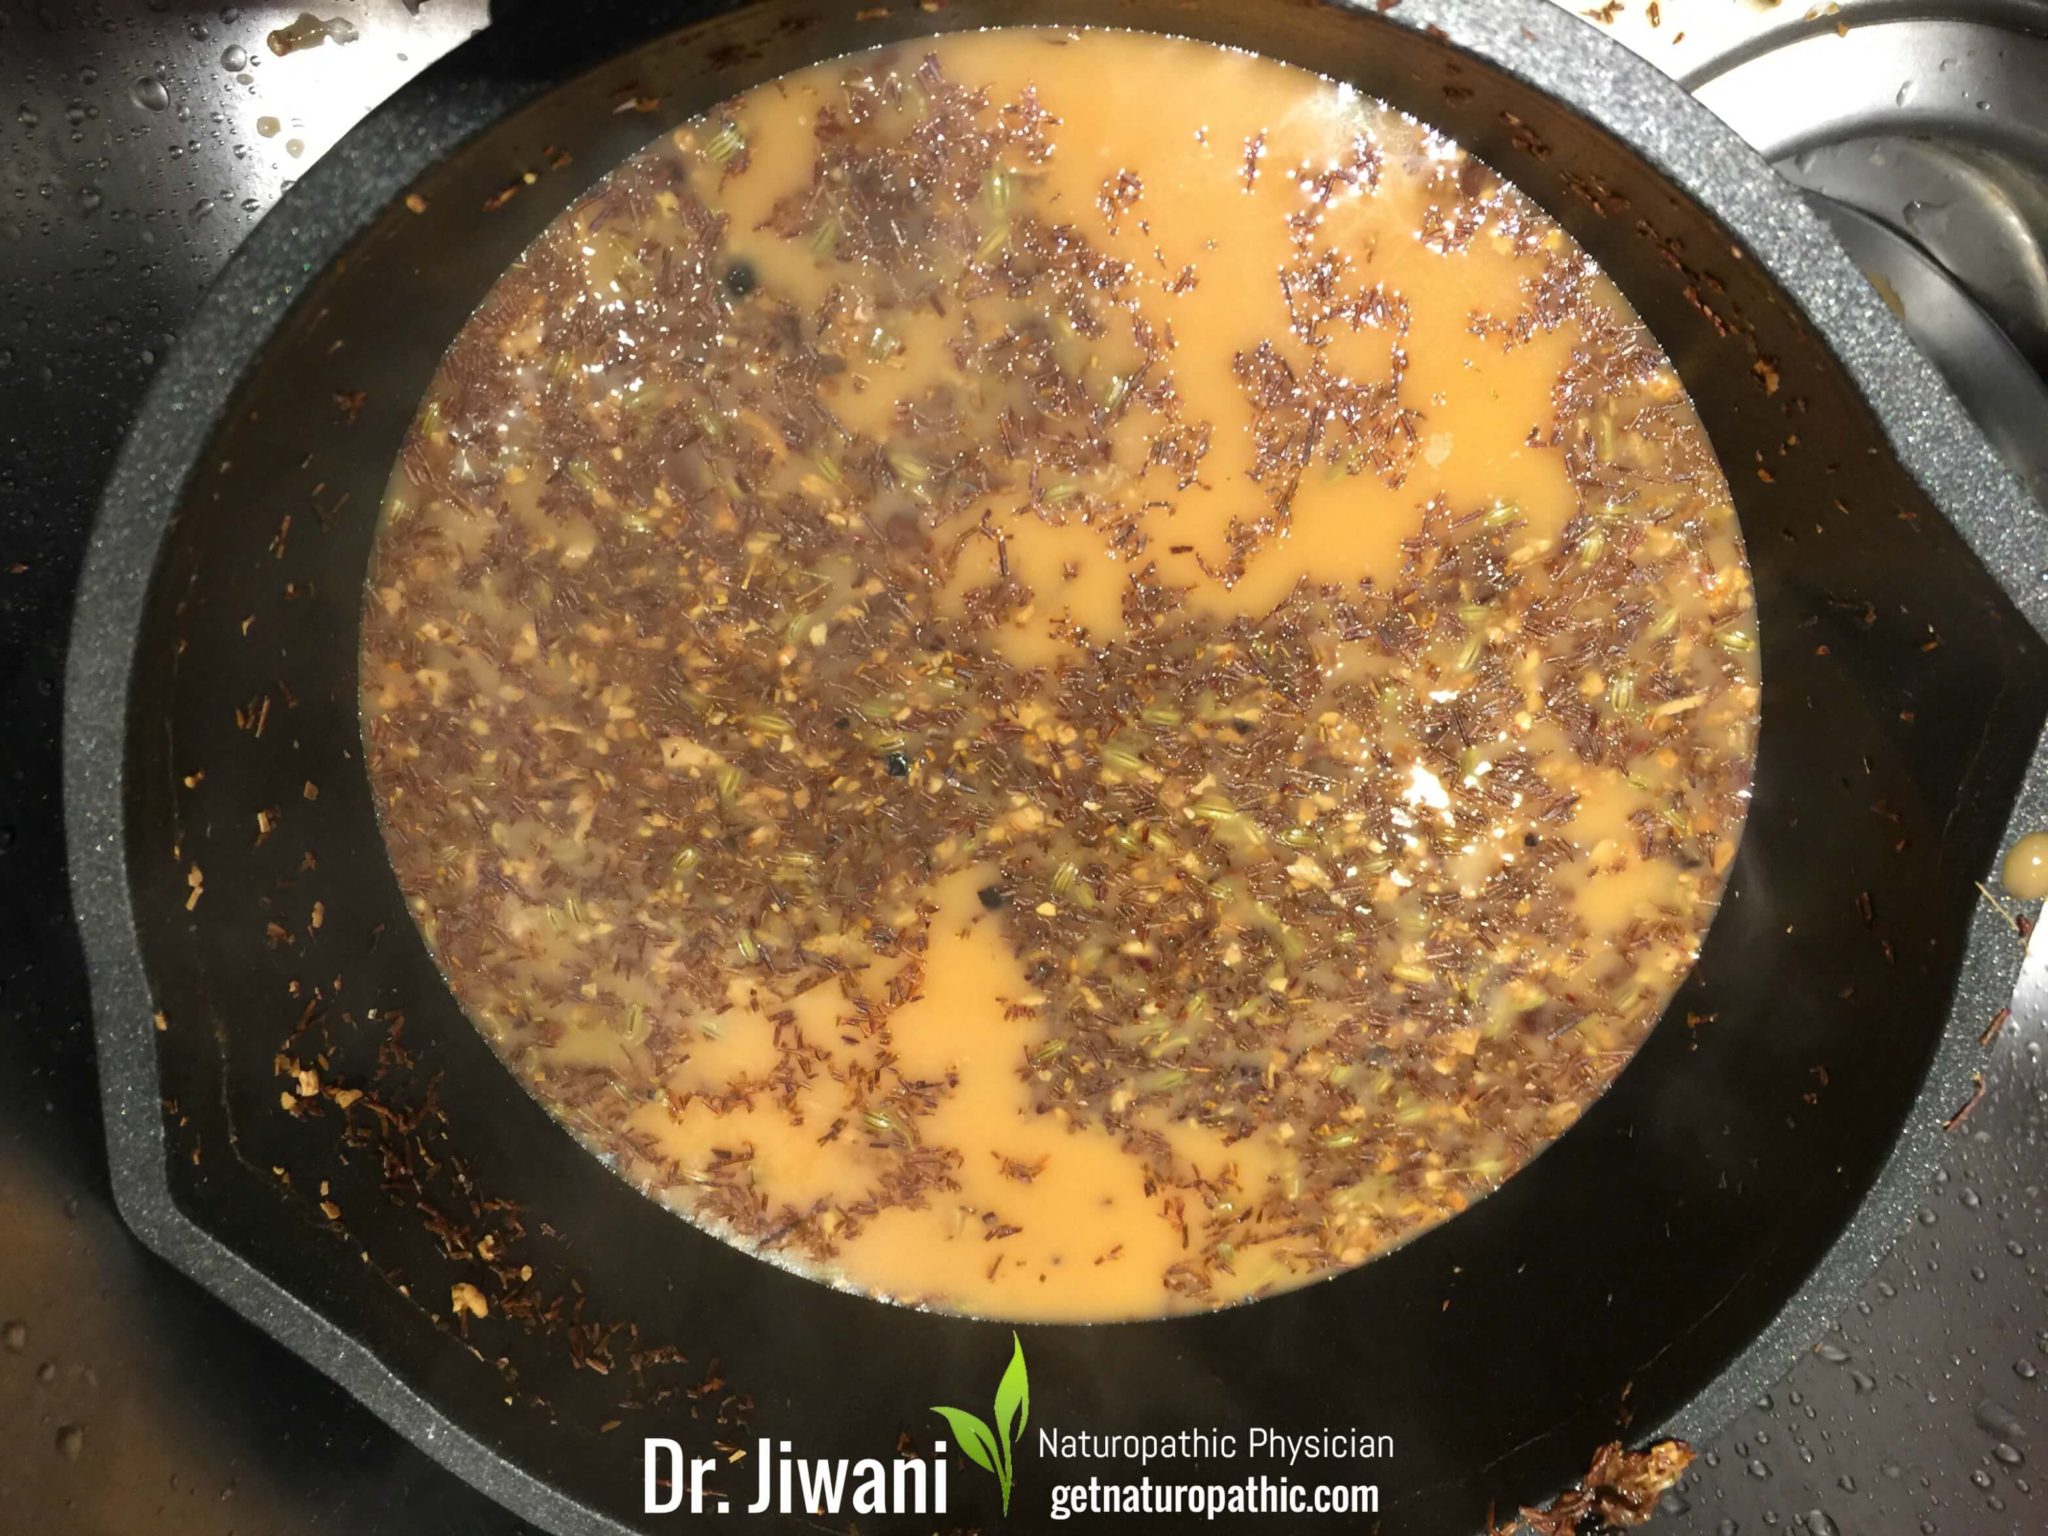 Dr. Jiwani's Coconut Boo Chai Latte: Low Carb, Gluten-Free, Egg-Free, Dairy-Free, Soy-Free, Corn-Free, Ideal For Paleo, Keto, Vegan & Allergy-Free Diets | Dr. Jiwani's Naturopathic Nuggets Blog